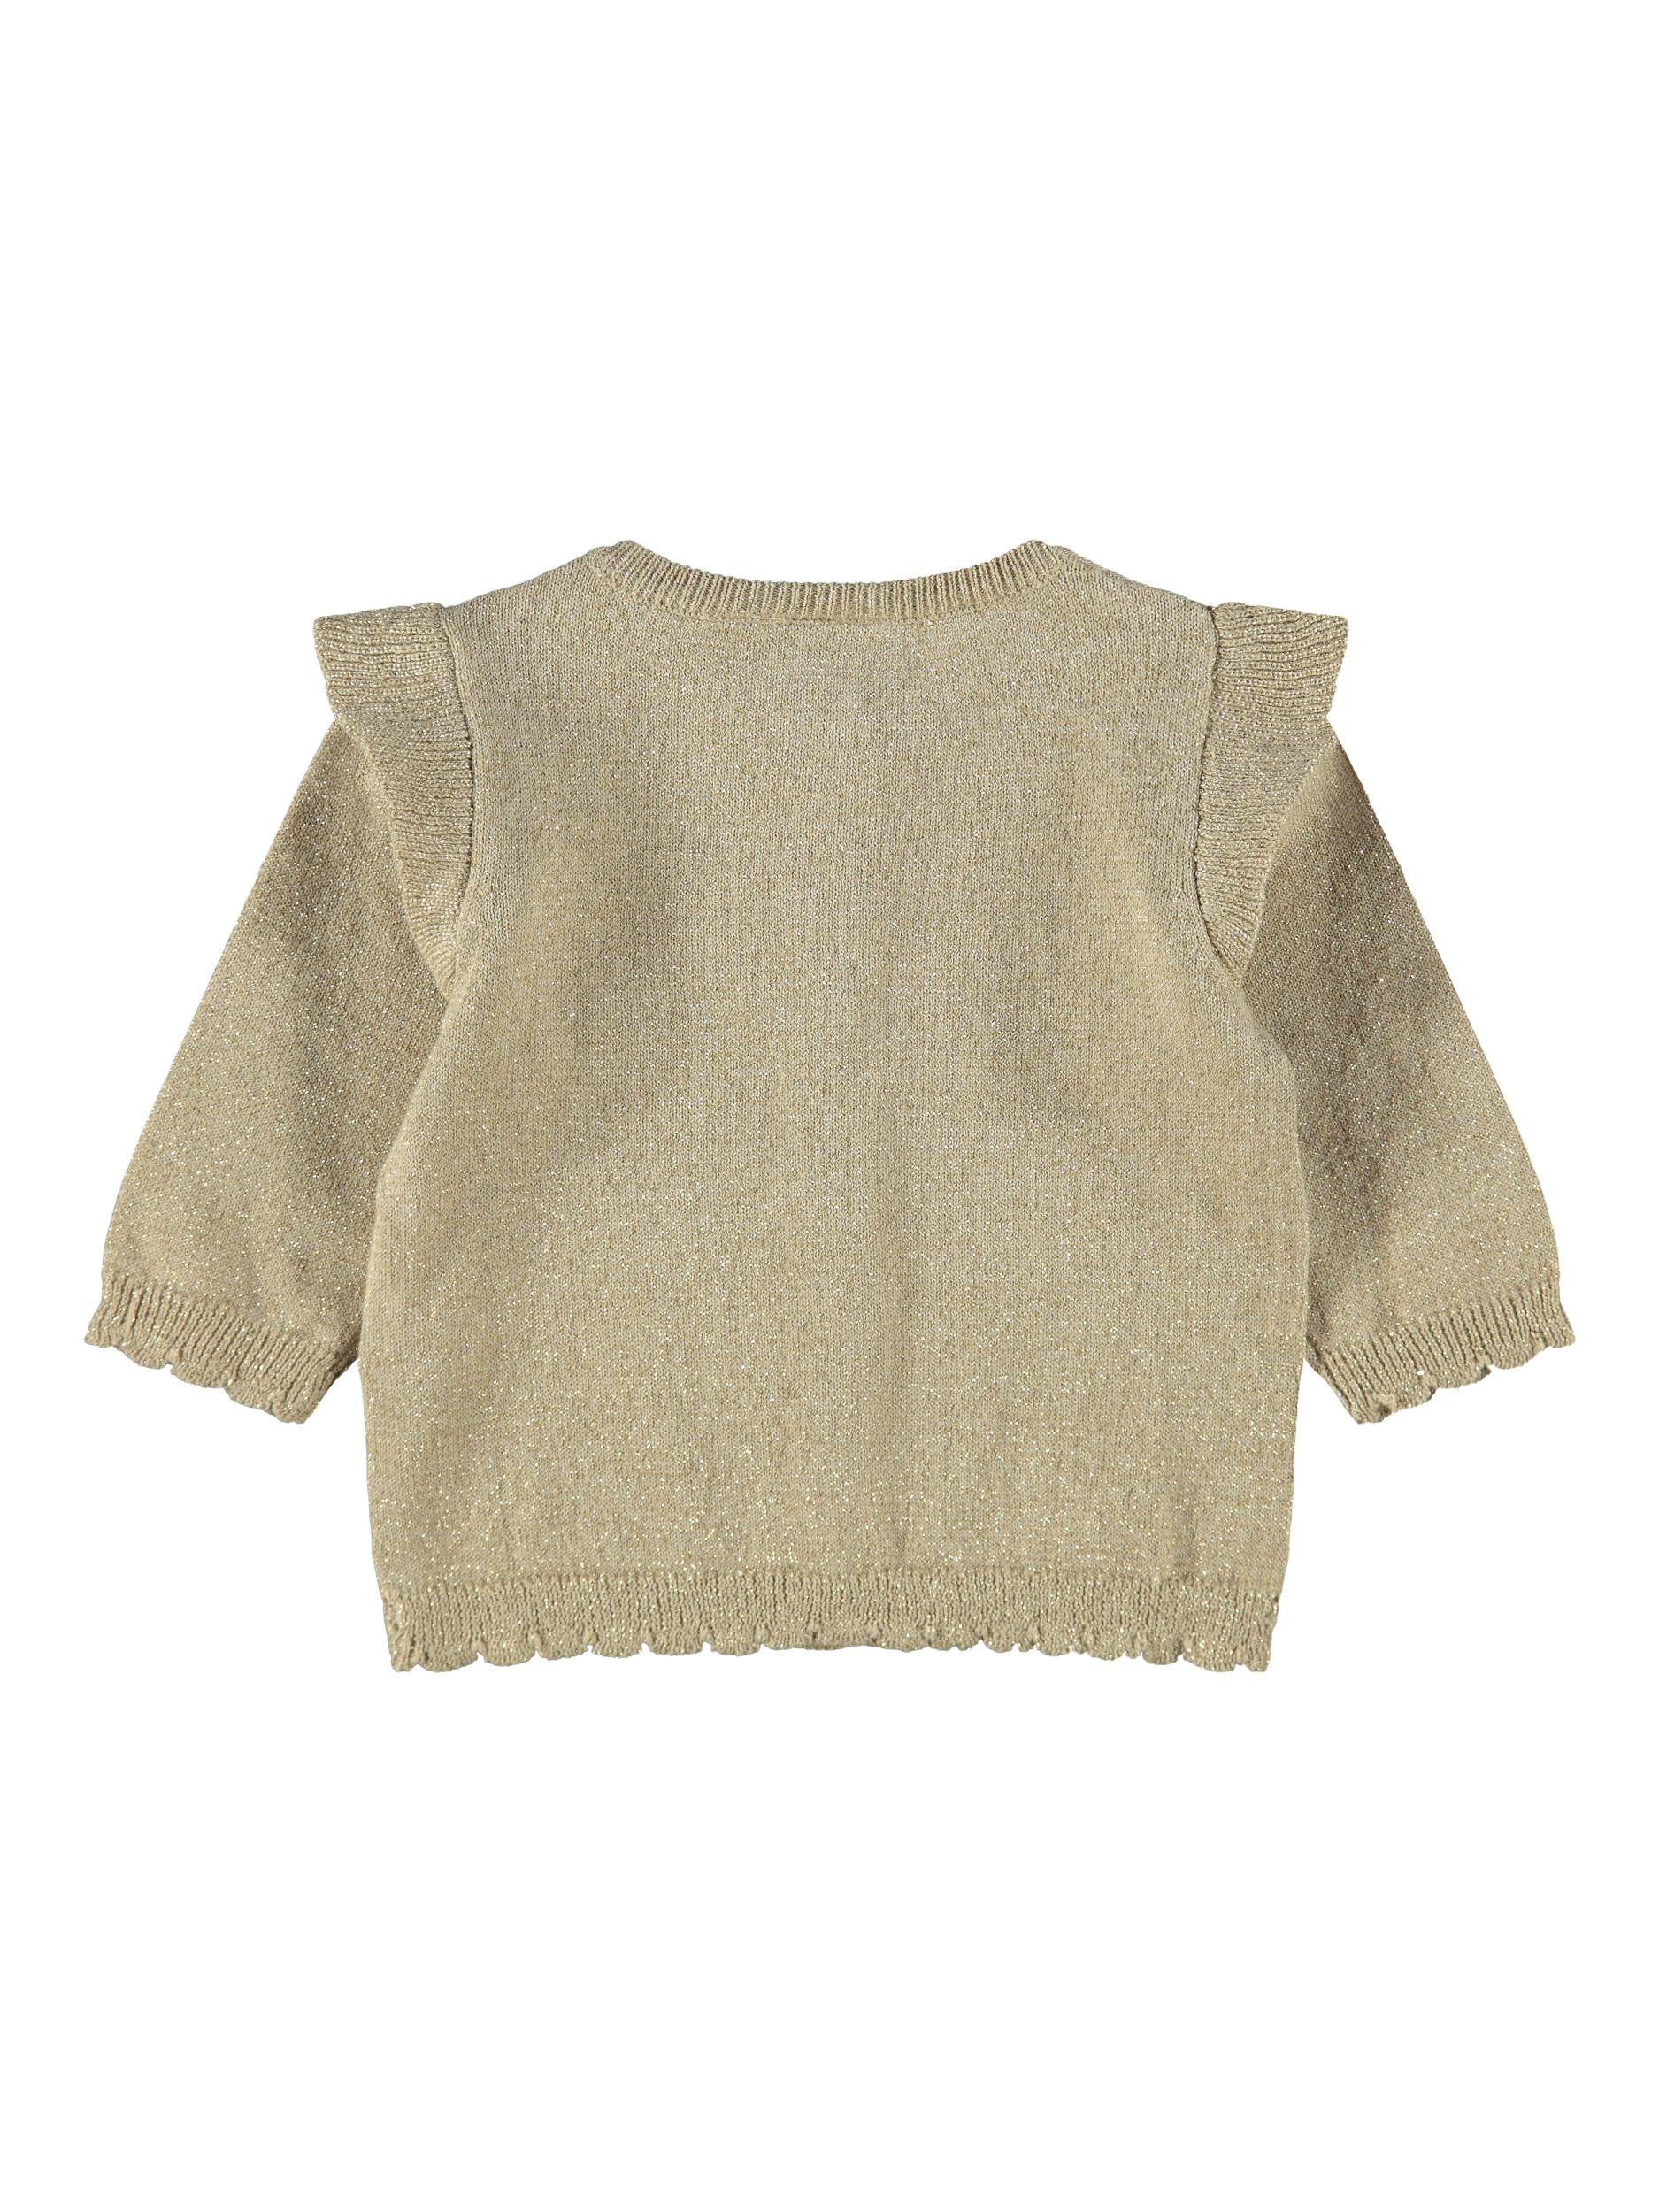 Name It Mille Cardigan, White Pepper, 80 cm